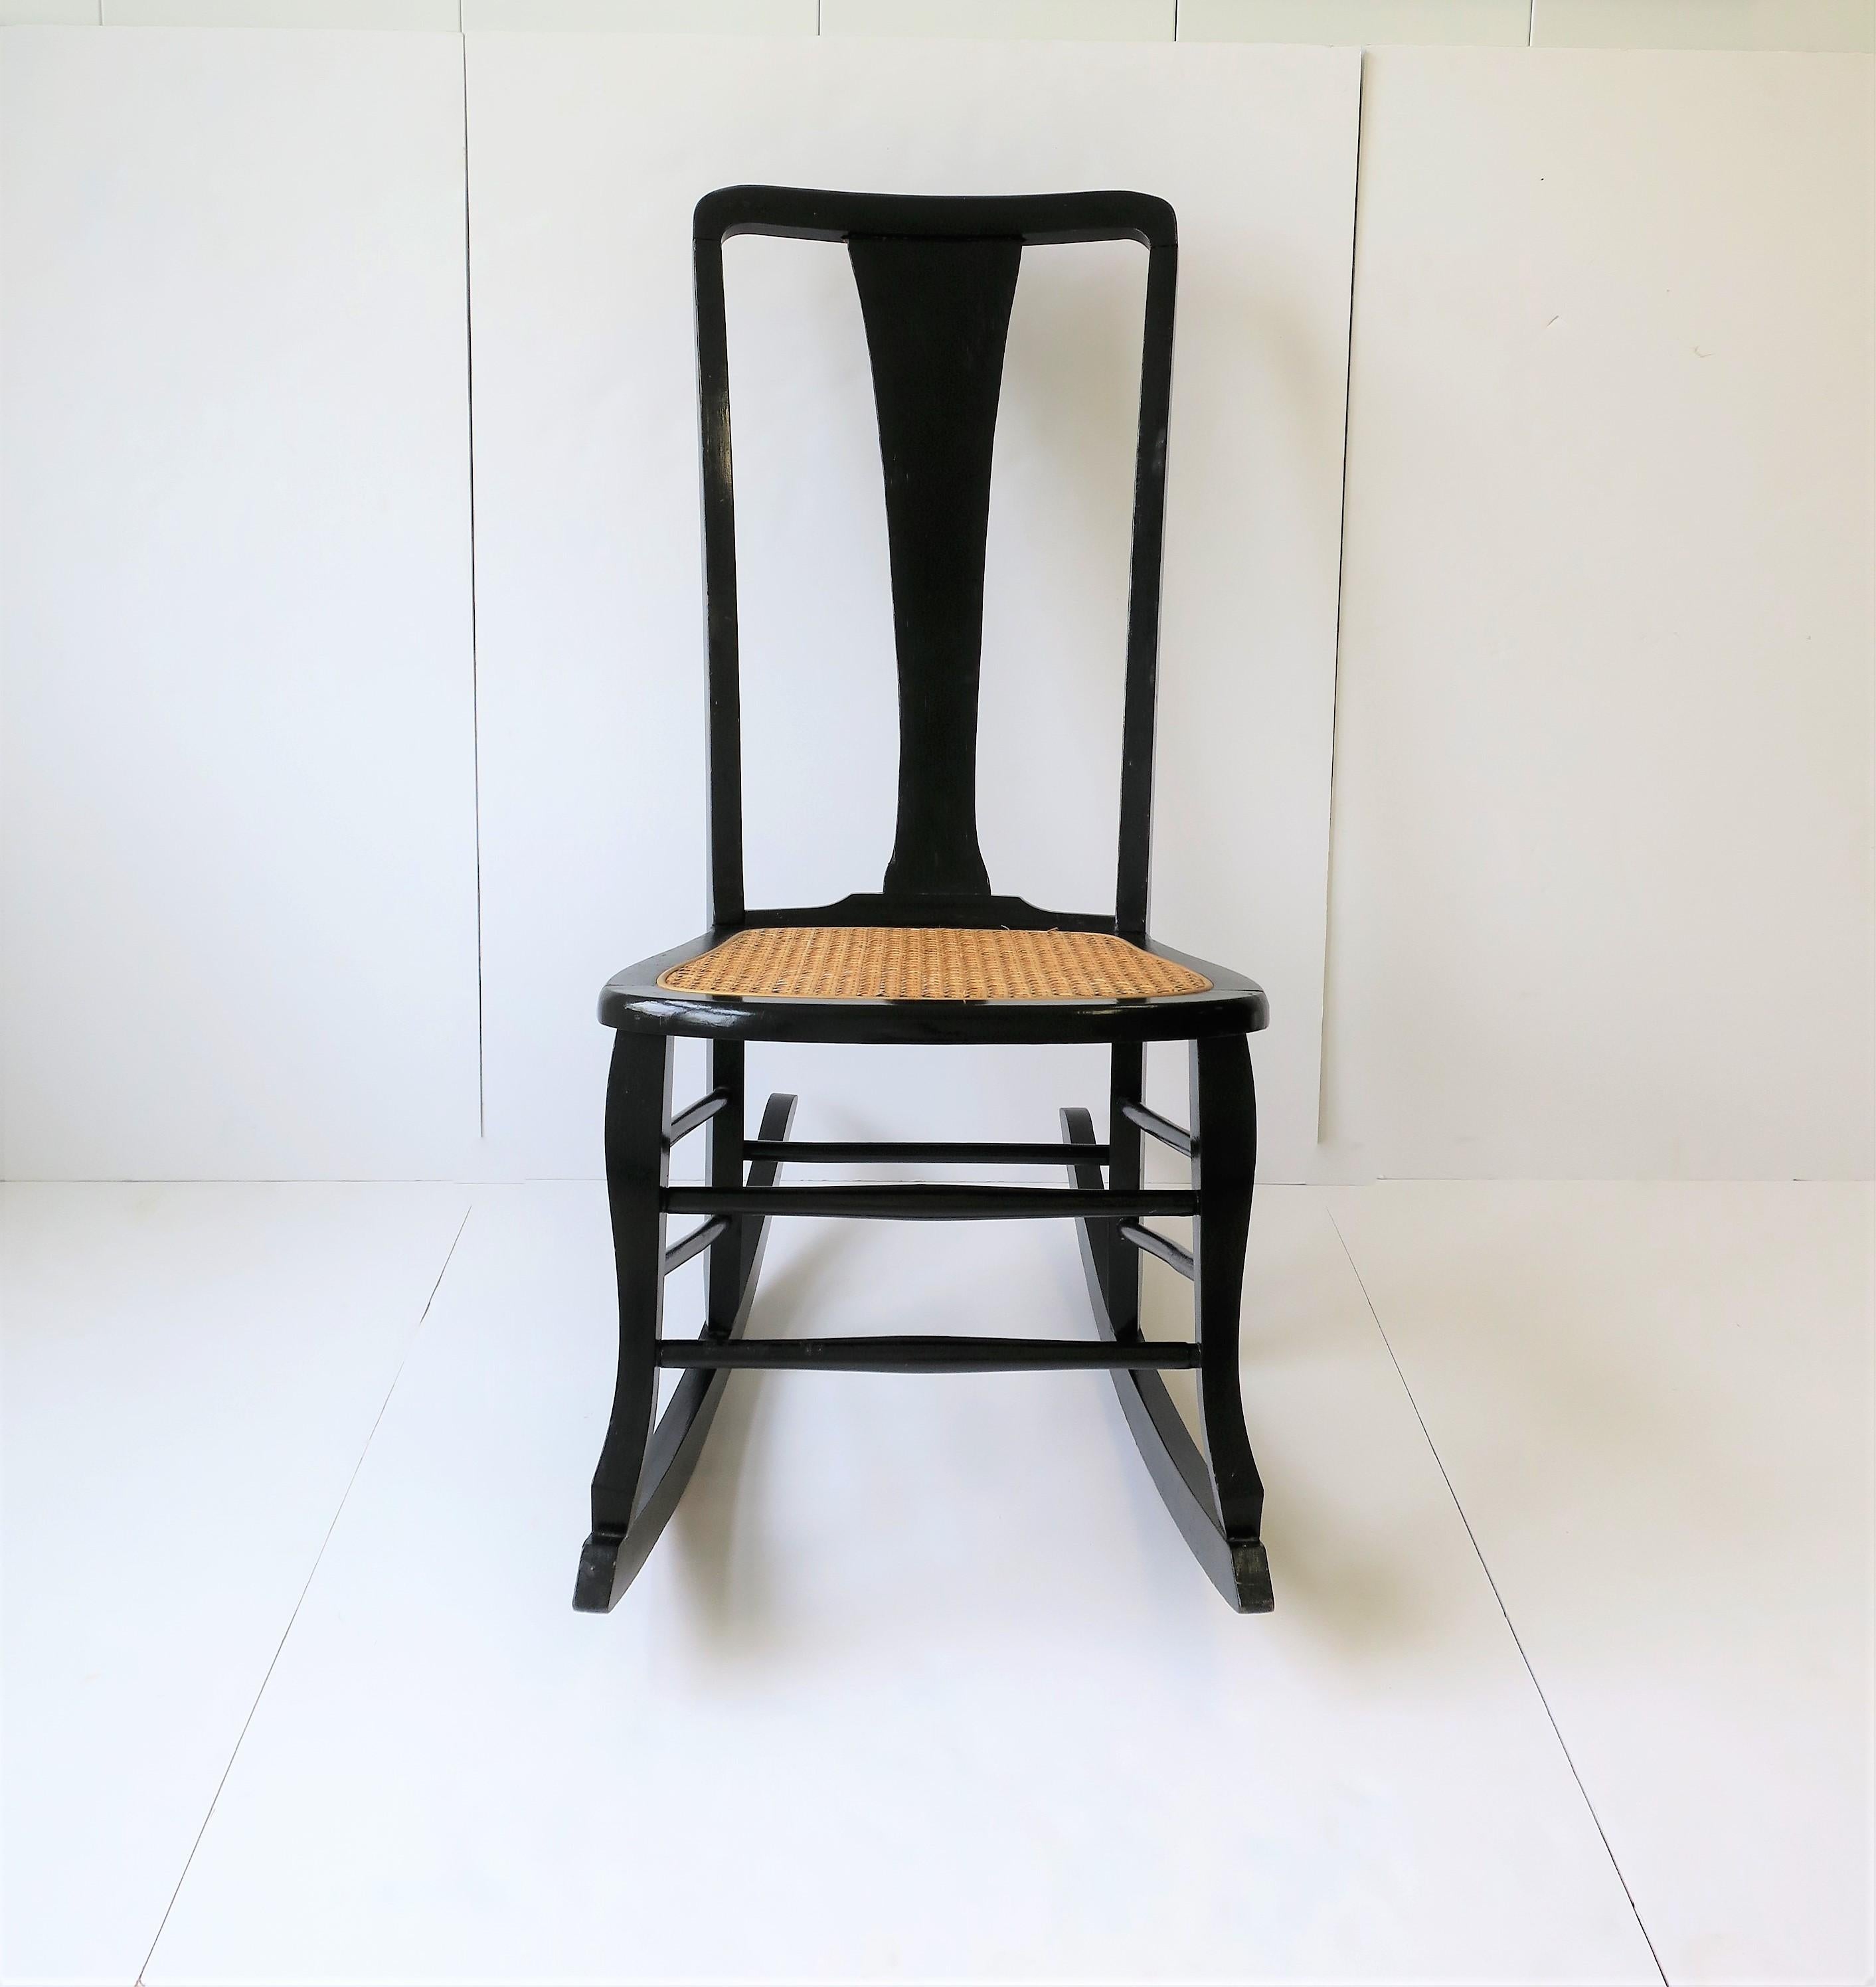 Wicker Cane and Black Wood Rocking Chair For Sale 2